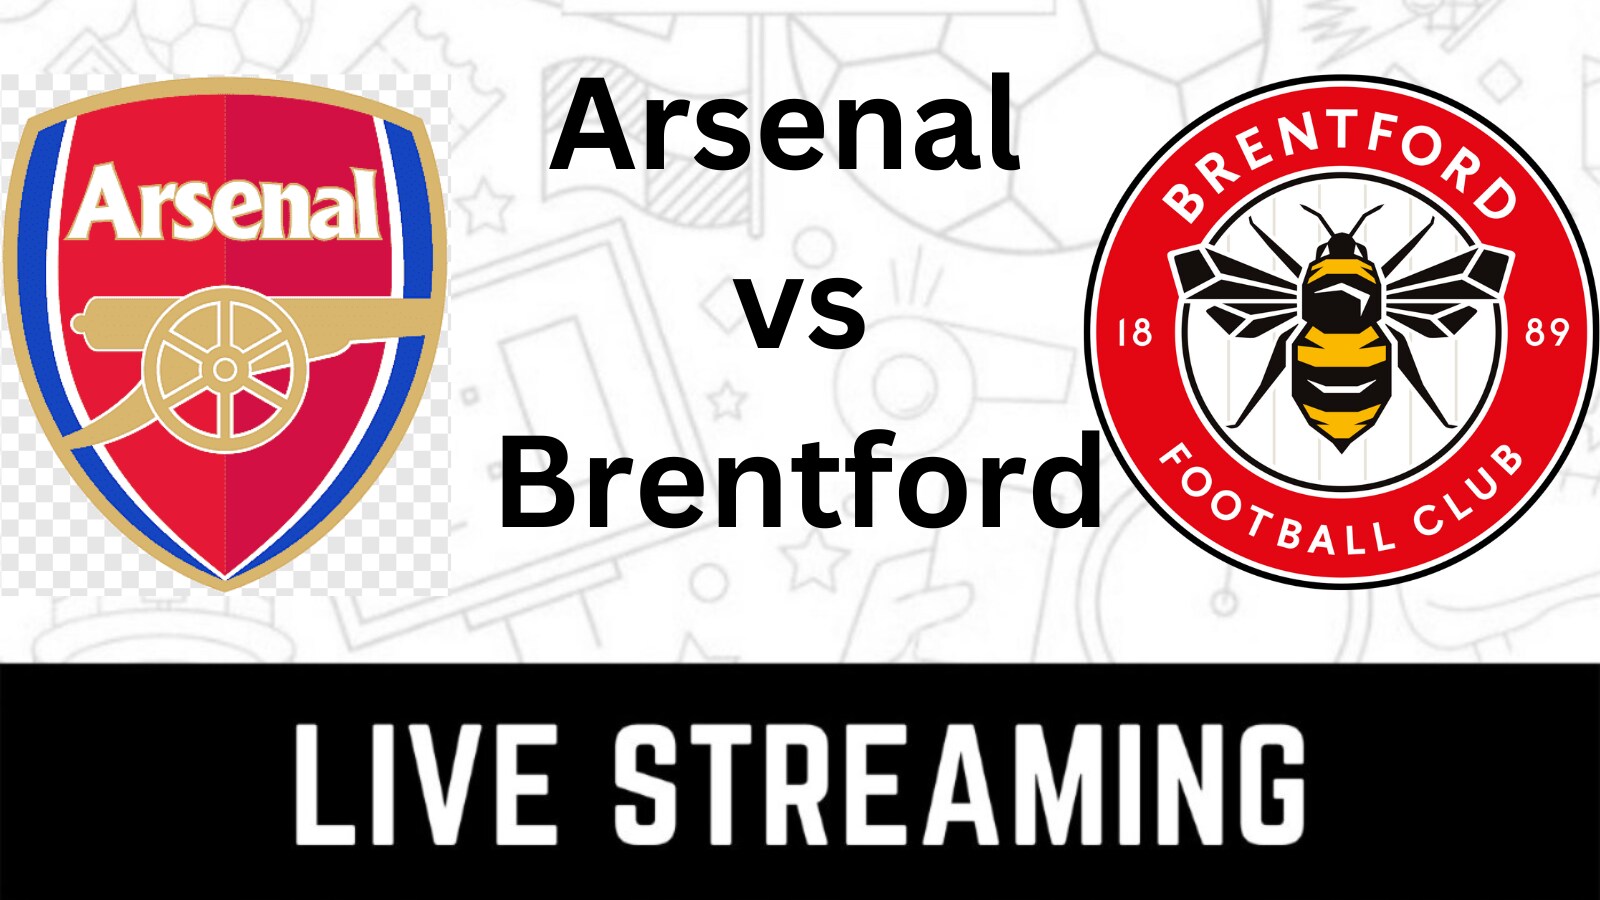 Arsenal vs Brentford Live Streaming When and Where to Watch Premier